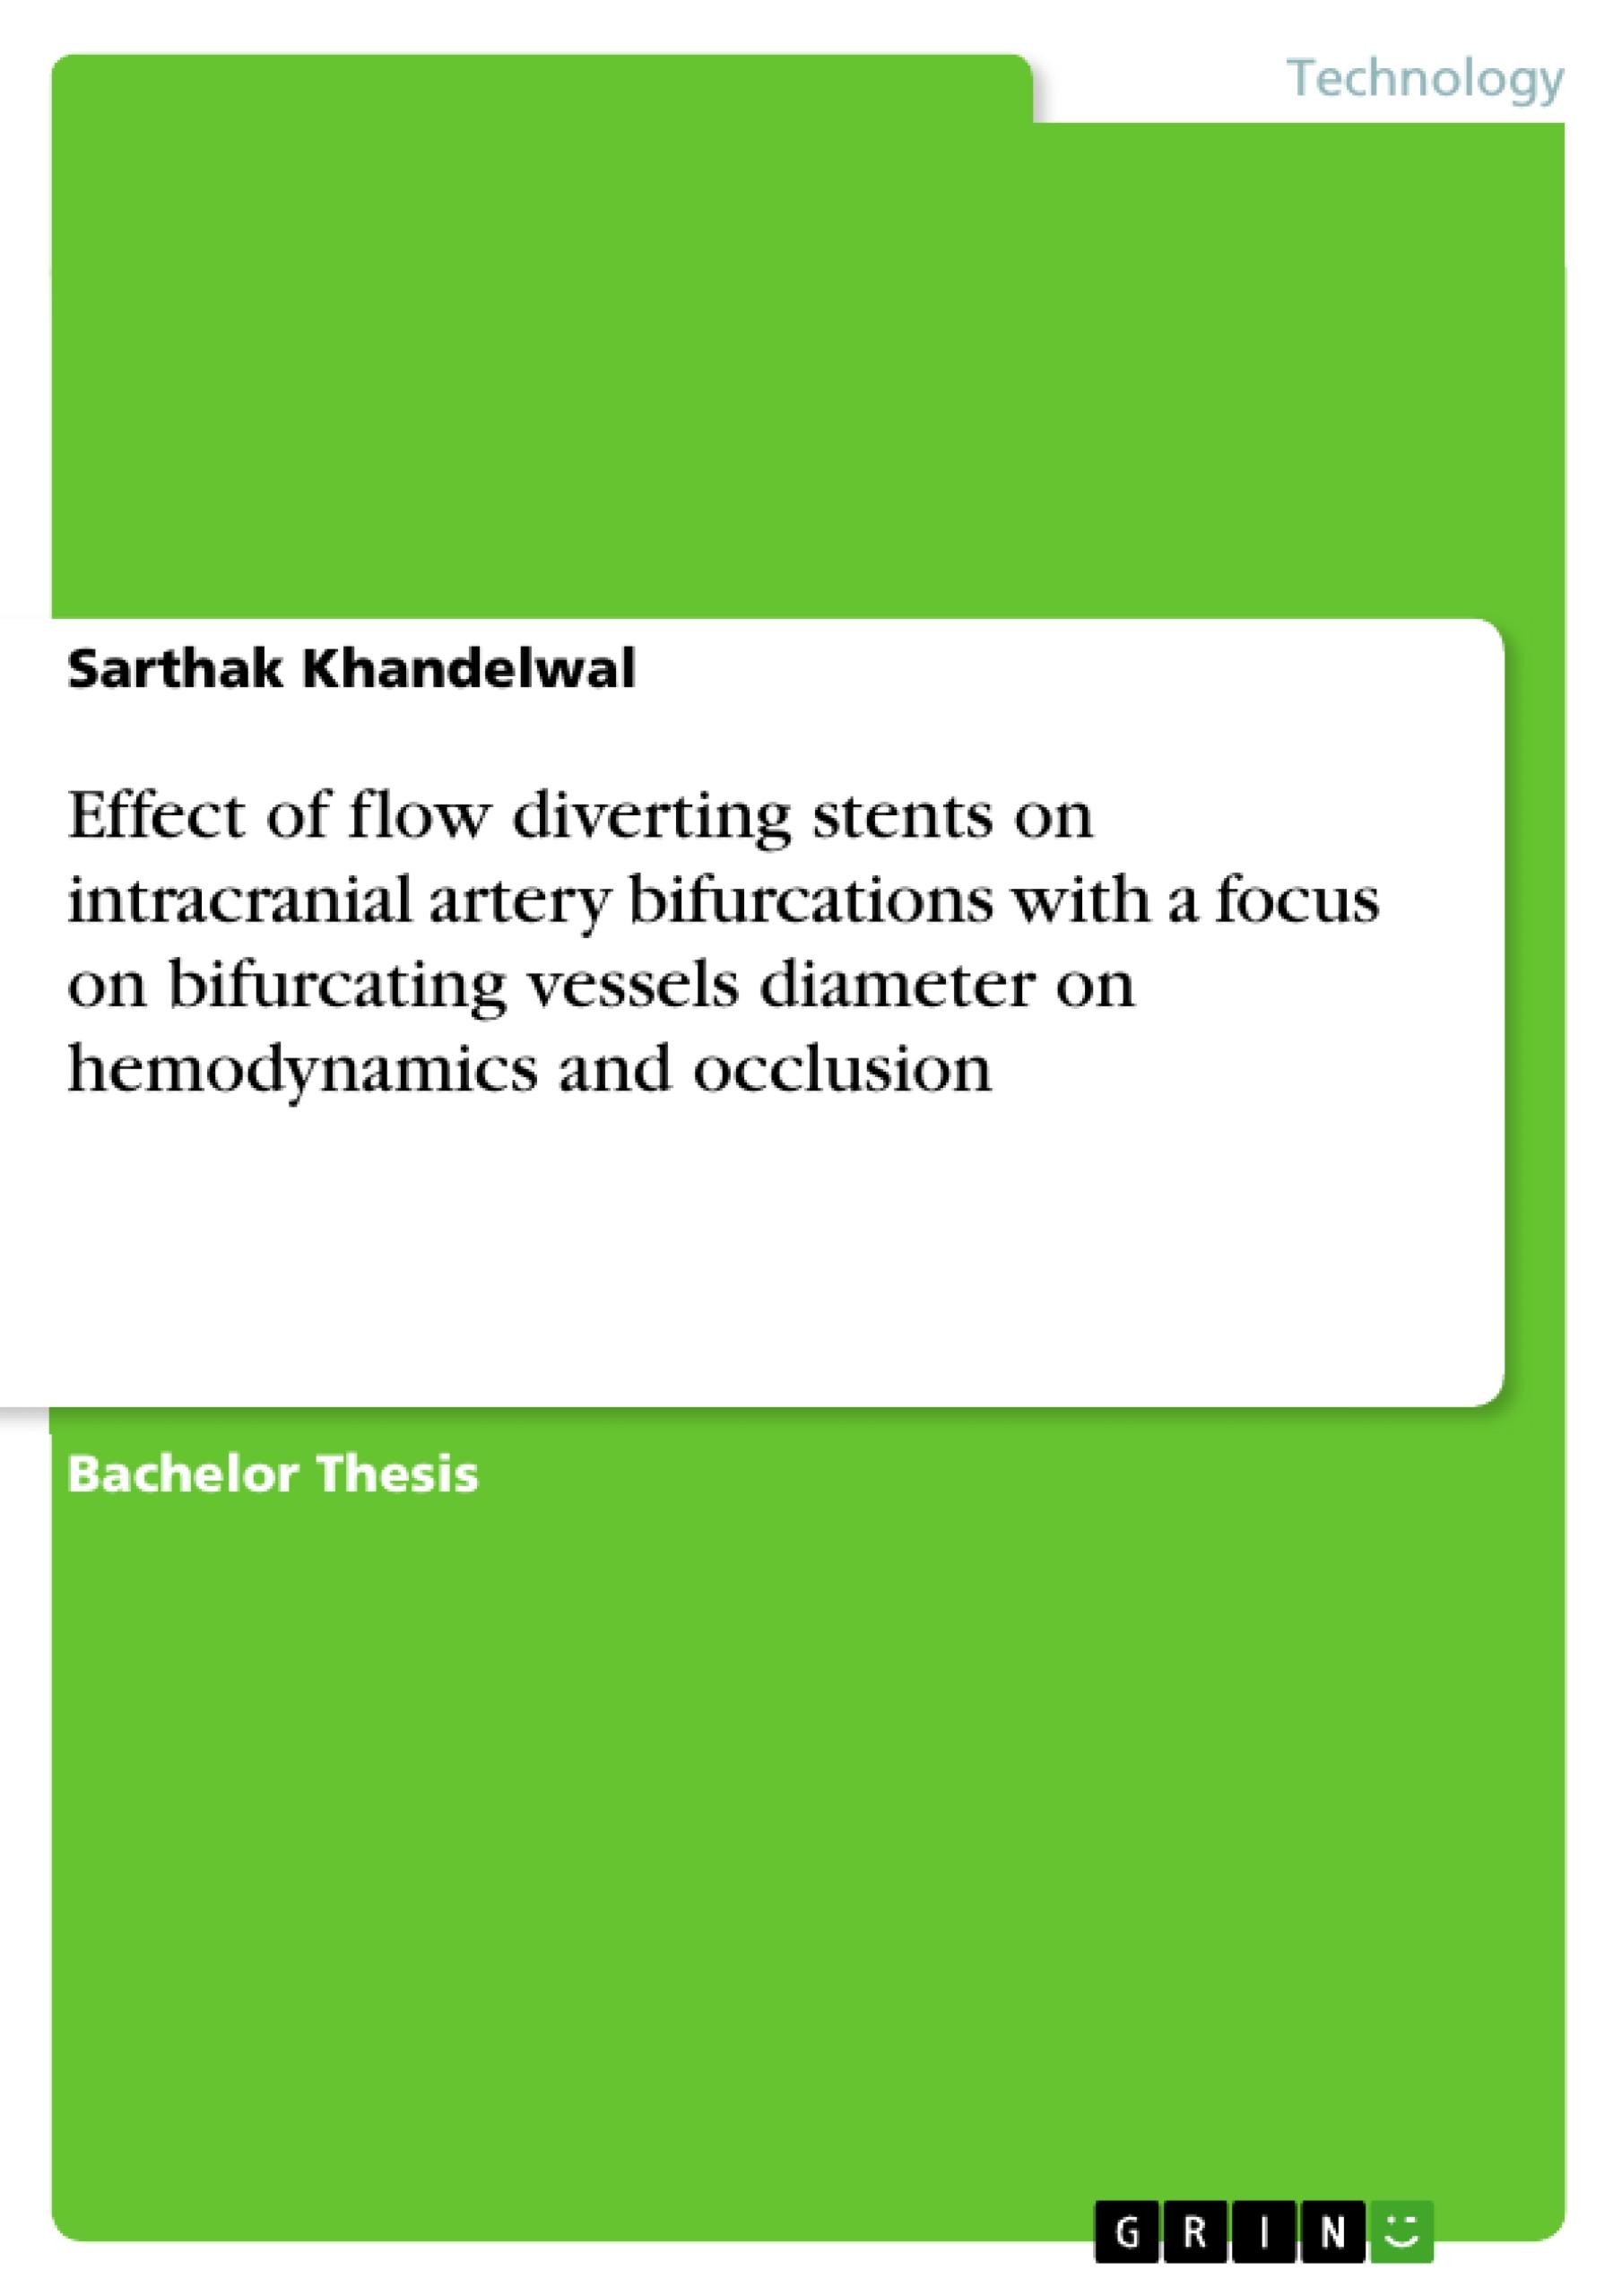 Effect of flow diverting stents on intracranial artery bifurcations with a focus on bifurcating vessels diameter on hemodynamics and occlusion  Sarthak Khandelwal  Taschenbuch  Englisch  2015 - Khandelwal, Sarthak